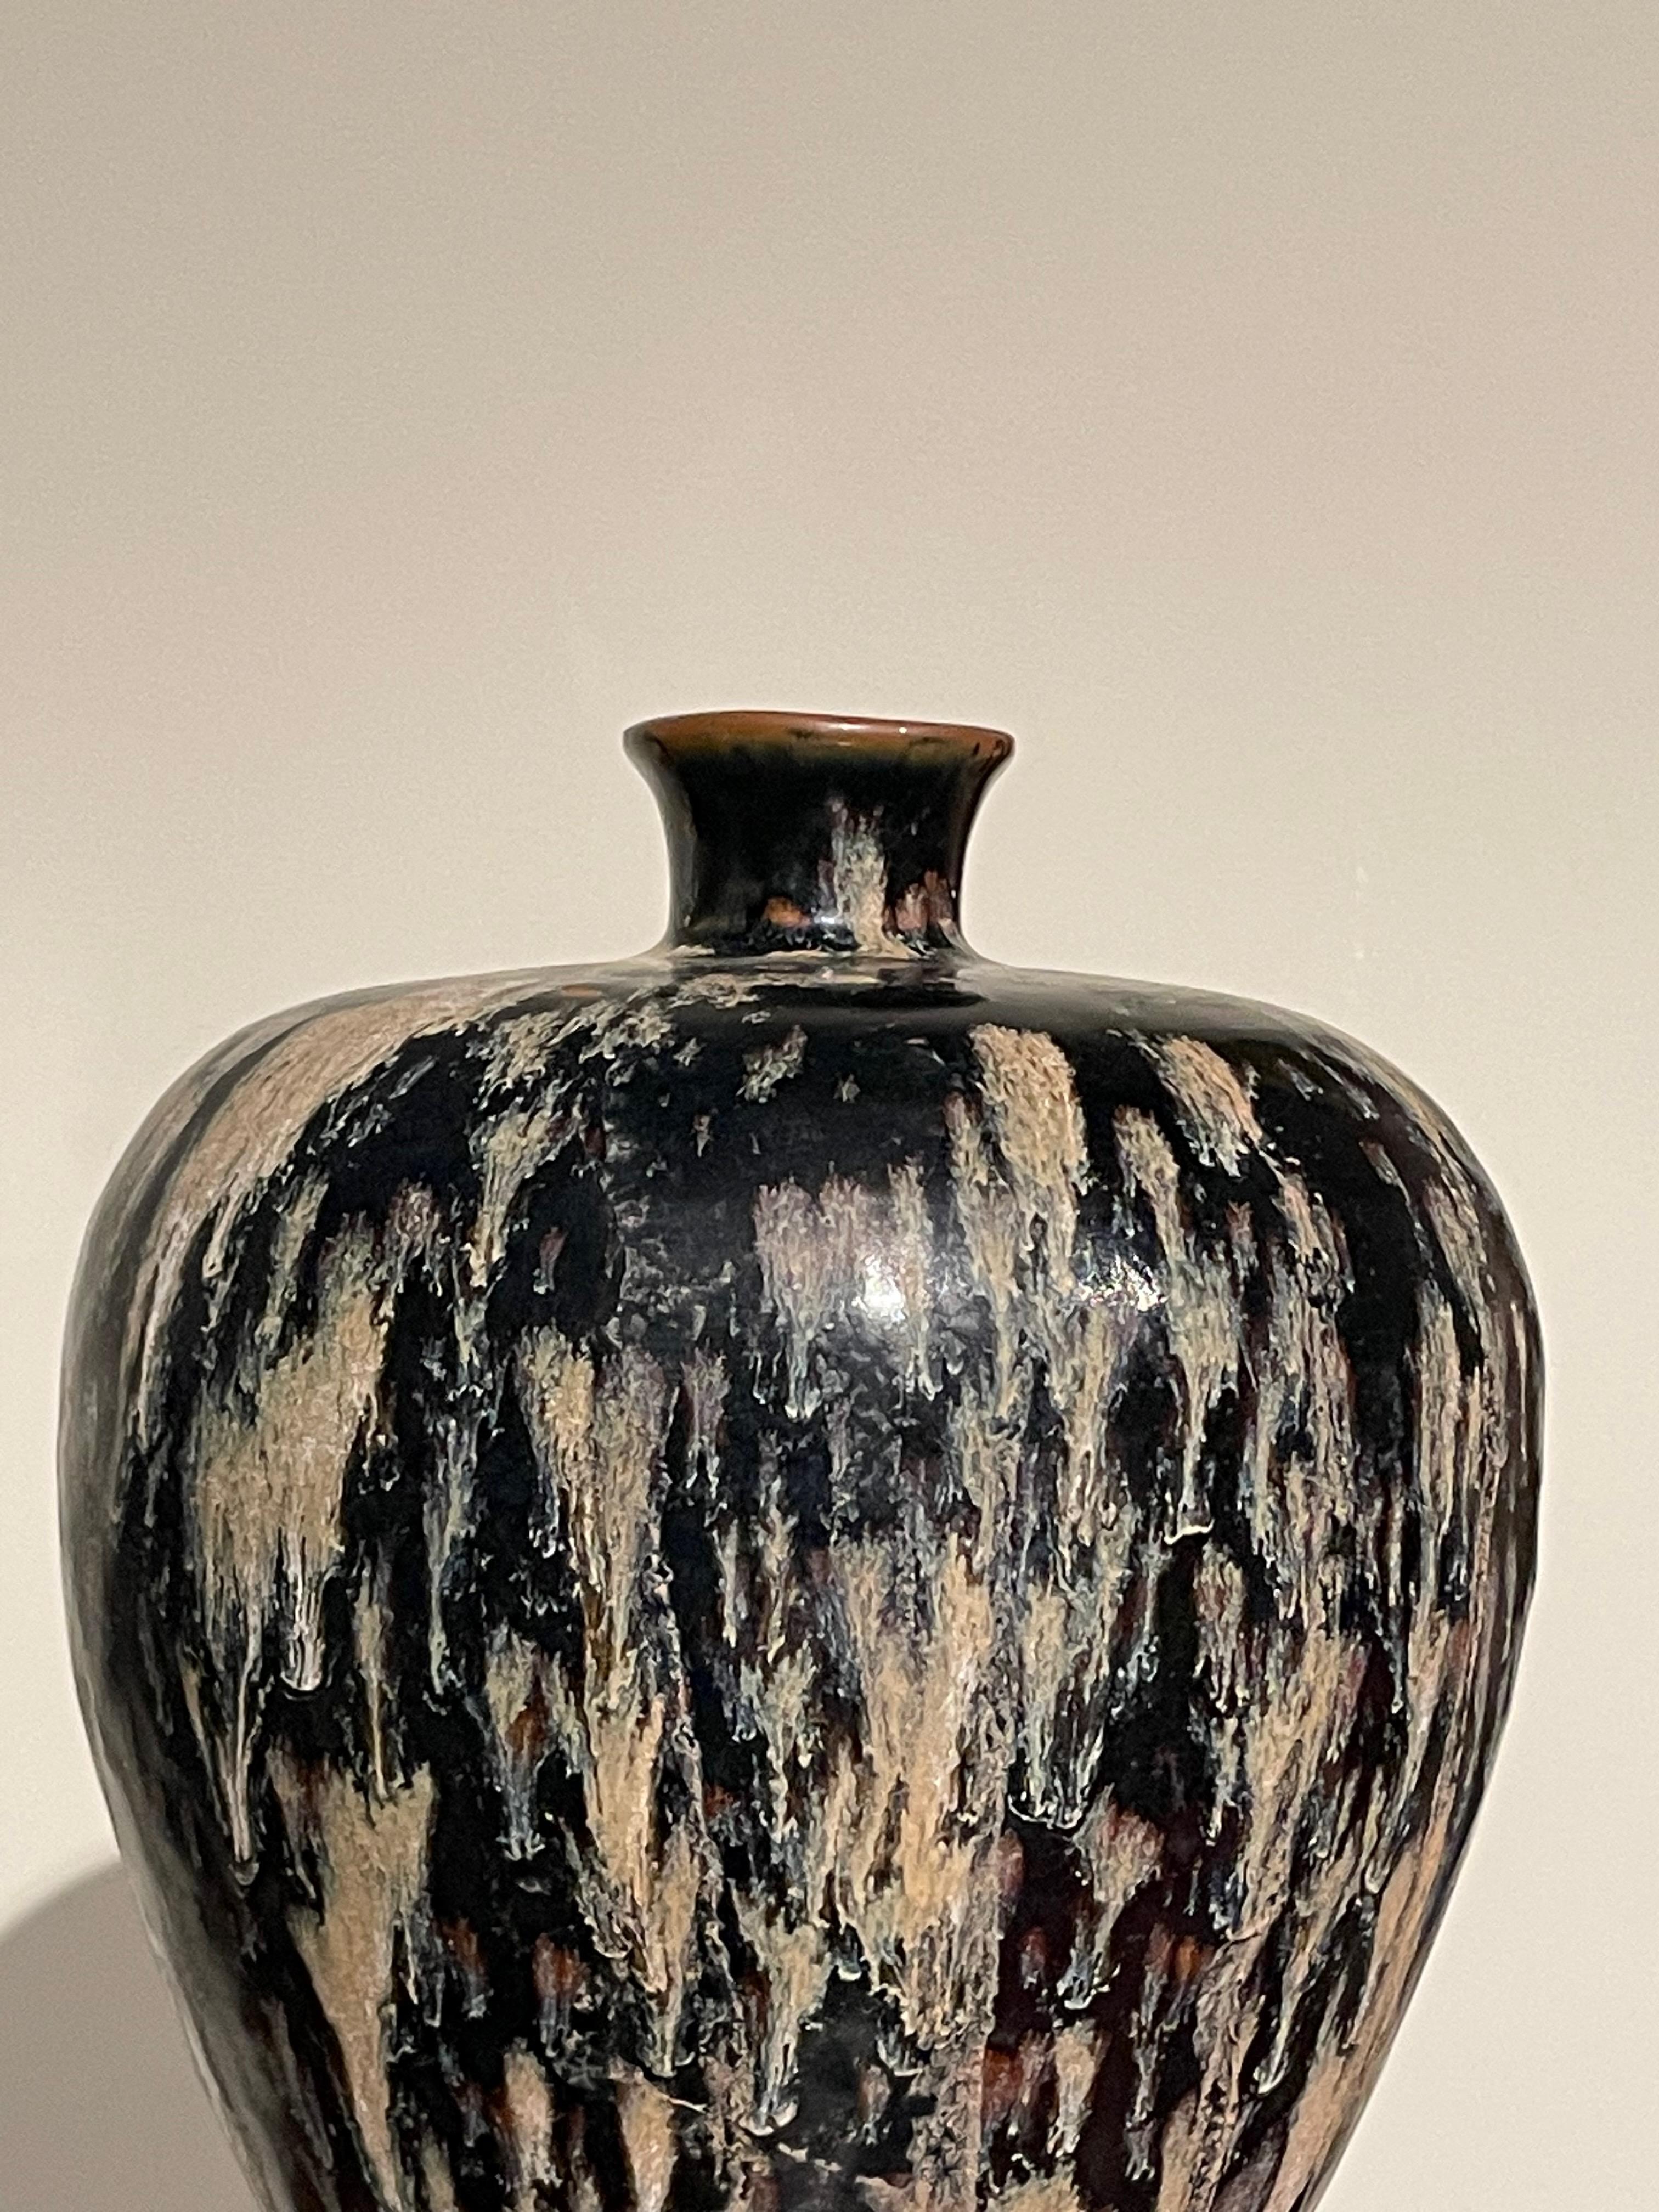 Contemporary Chinese black and cream splatter designed glaze vase.
Tall hour glass shape.
Two available and sold individually.
Shorter style also available ( S6312 )
